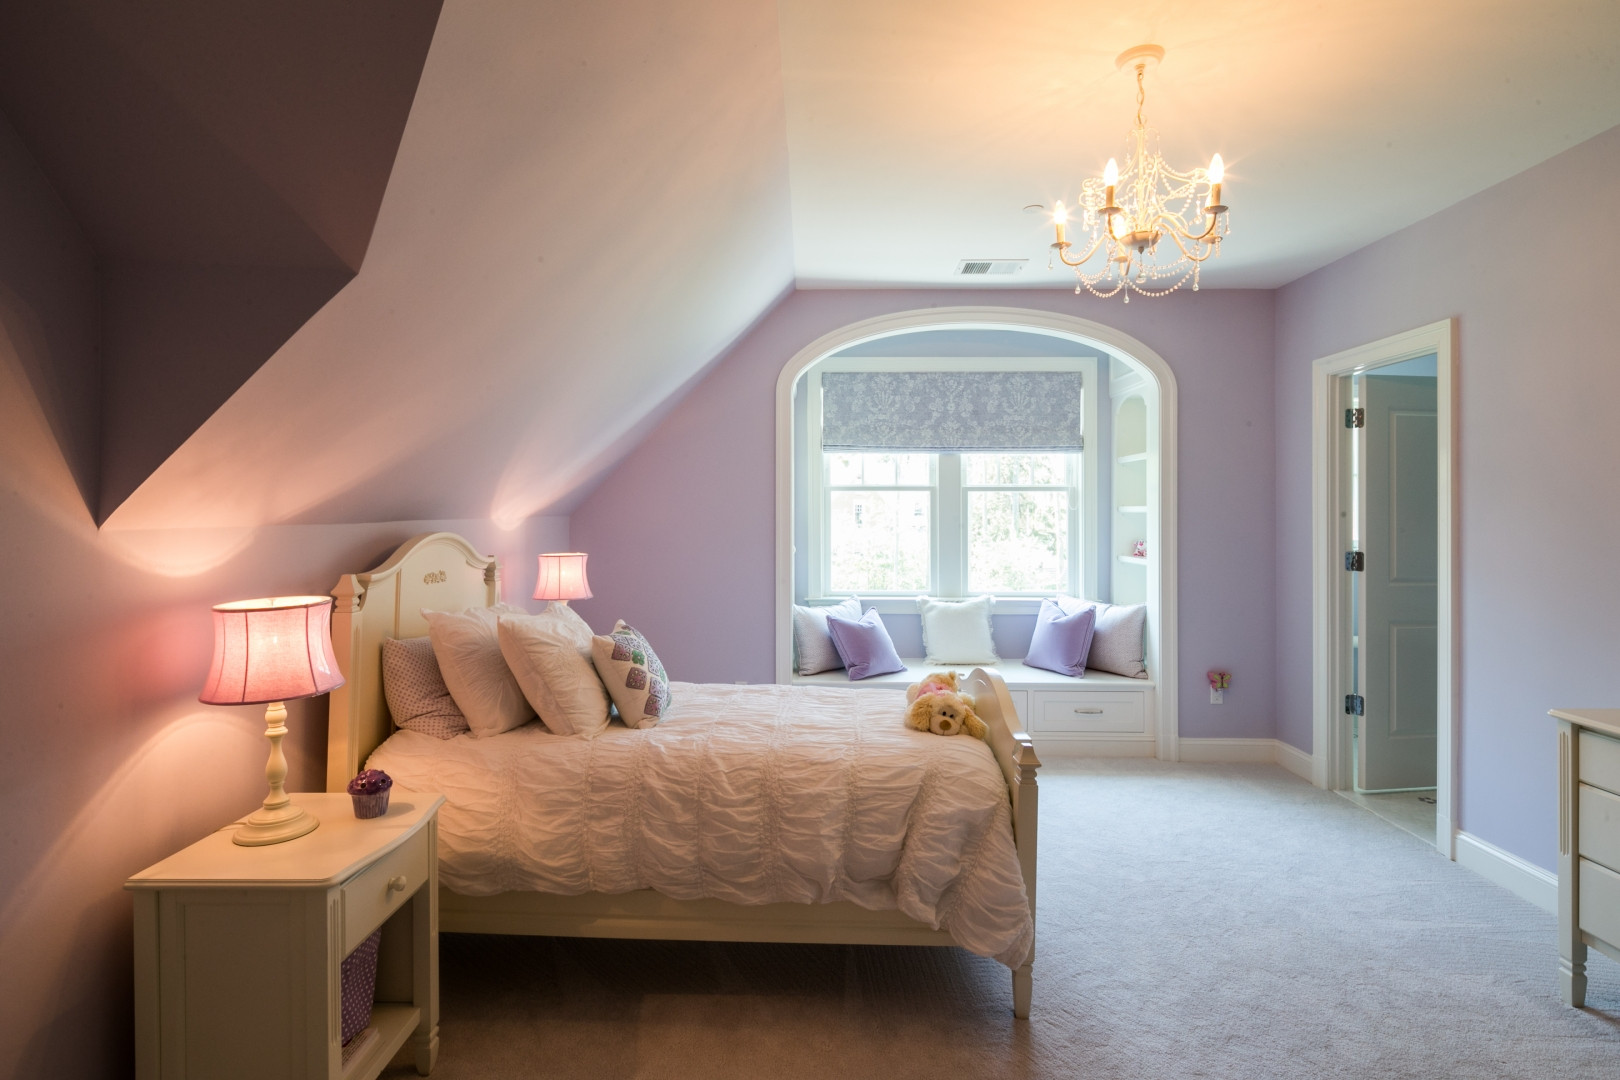 Lavender Bedroom Walls
 Top 5 Colors For A Seriously Soothing Bedroom